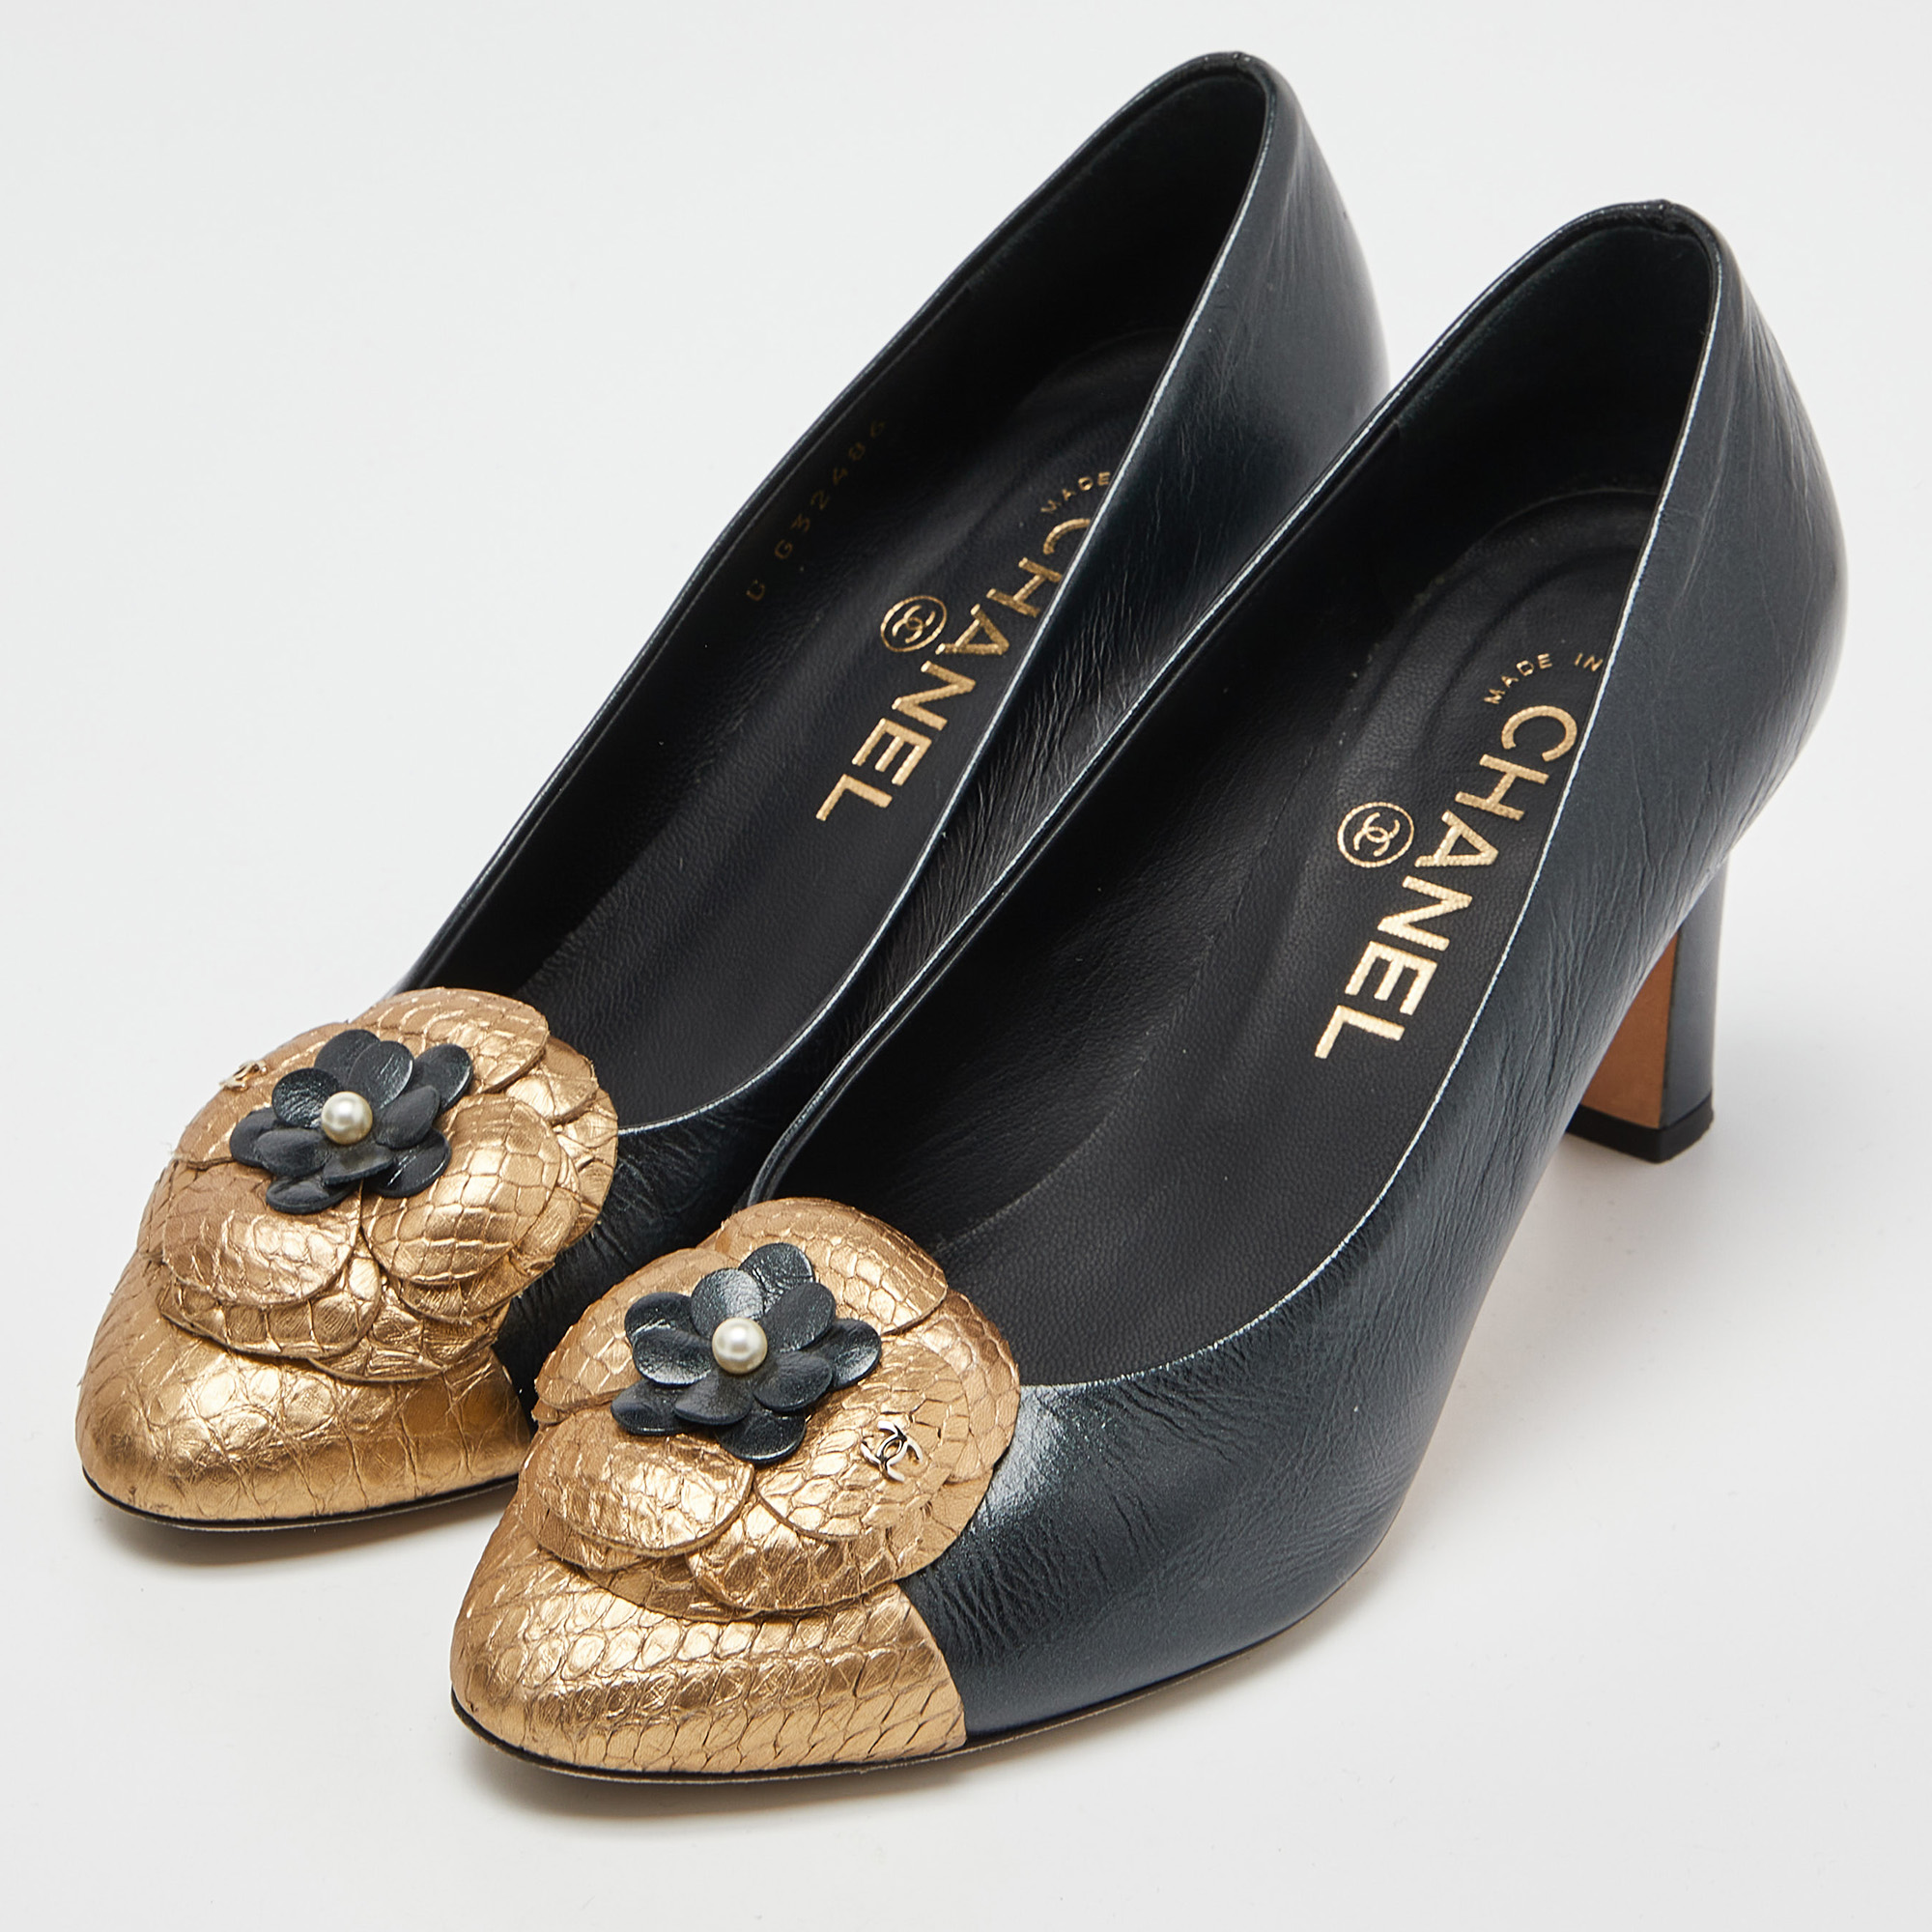 

Chanel Black/Gold Leather and Python Embossed Cap Toe CC Camellia Pumps Size